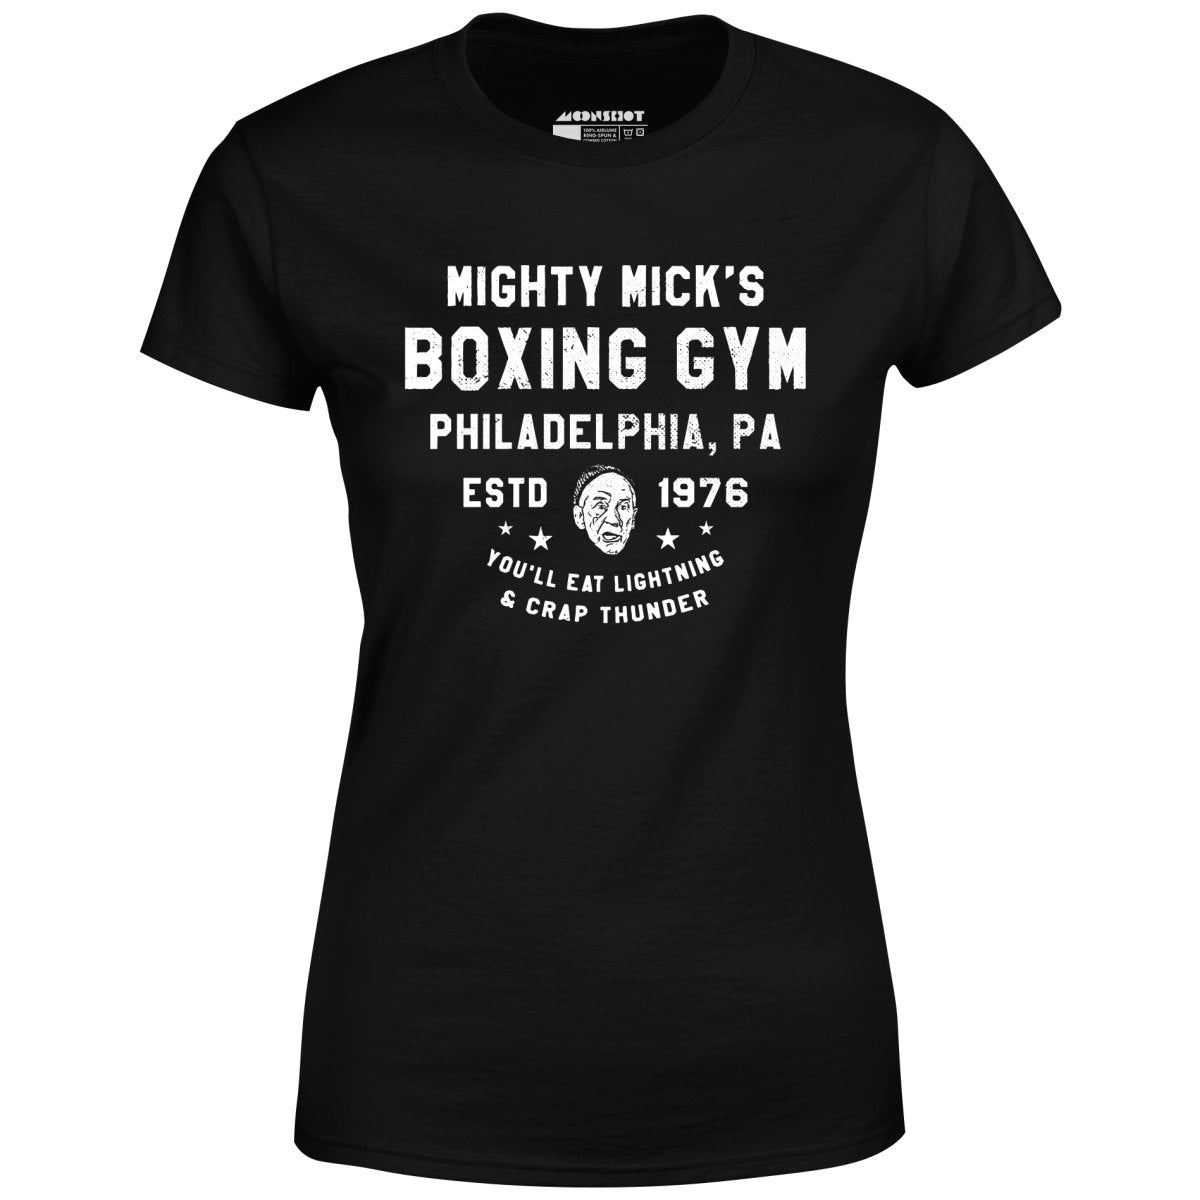 Mighty Mick's Boxing Gym - Women's T-Shirt